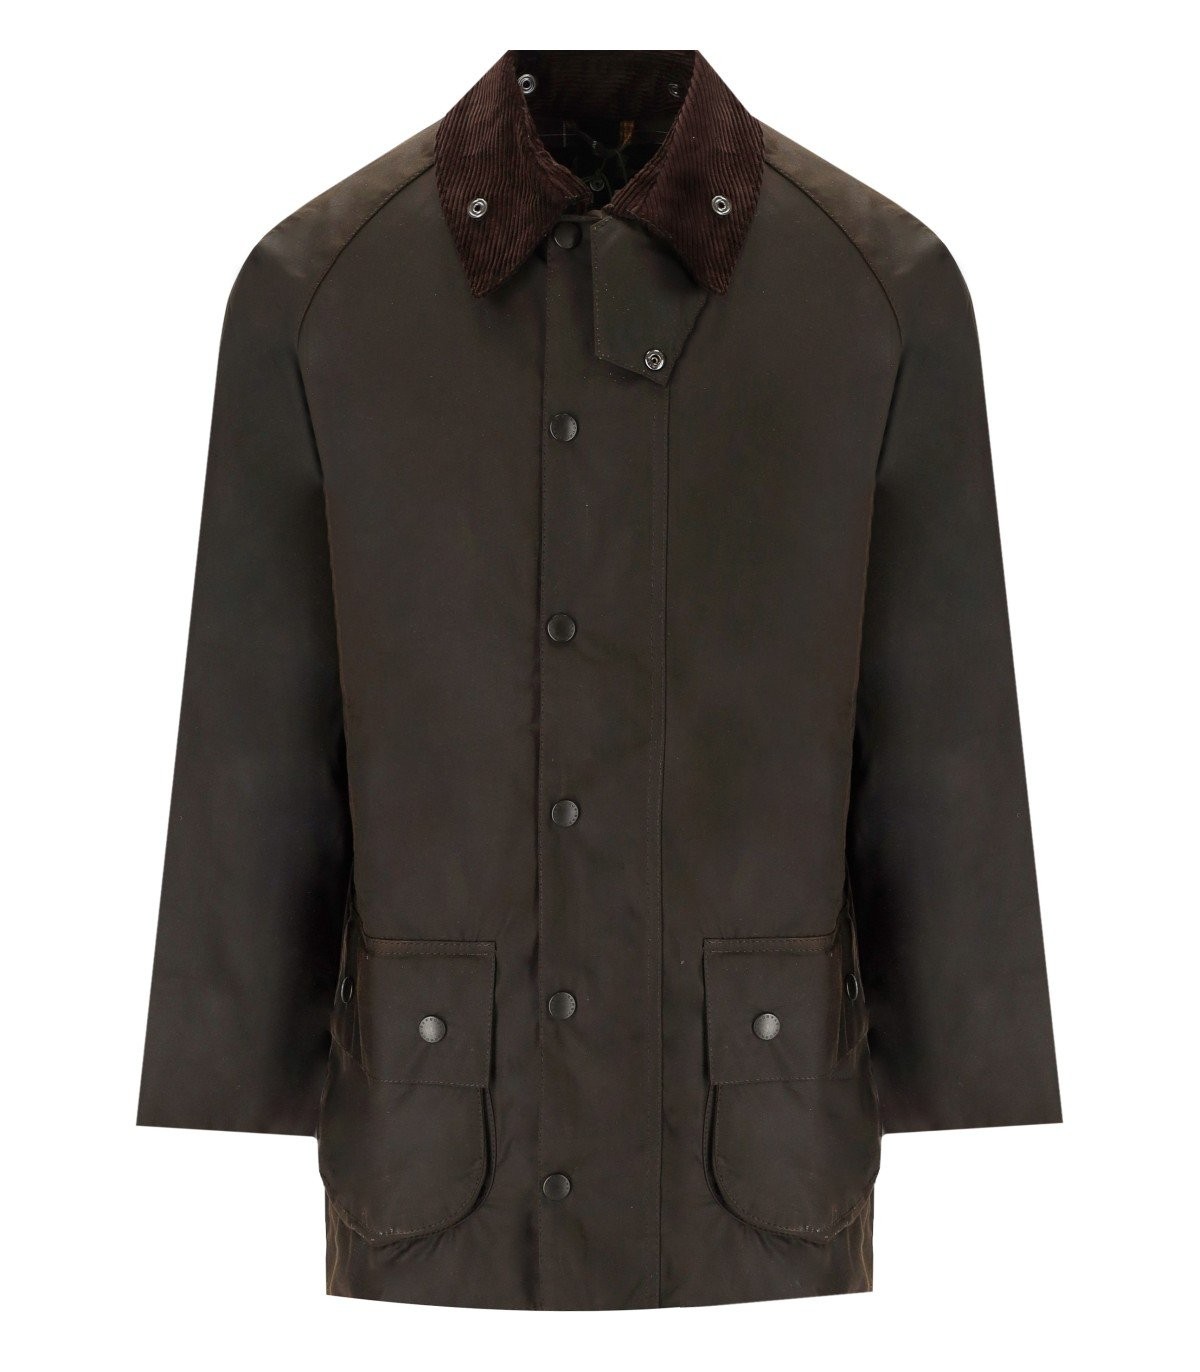 BARBOUR CLASSIC BEAUFORT WAX OLIVE GREEN JACKET